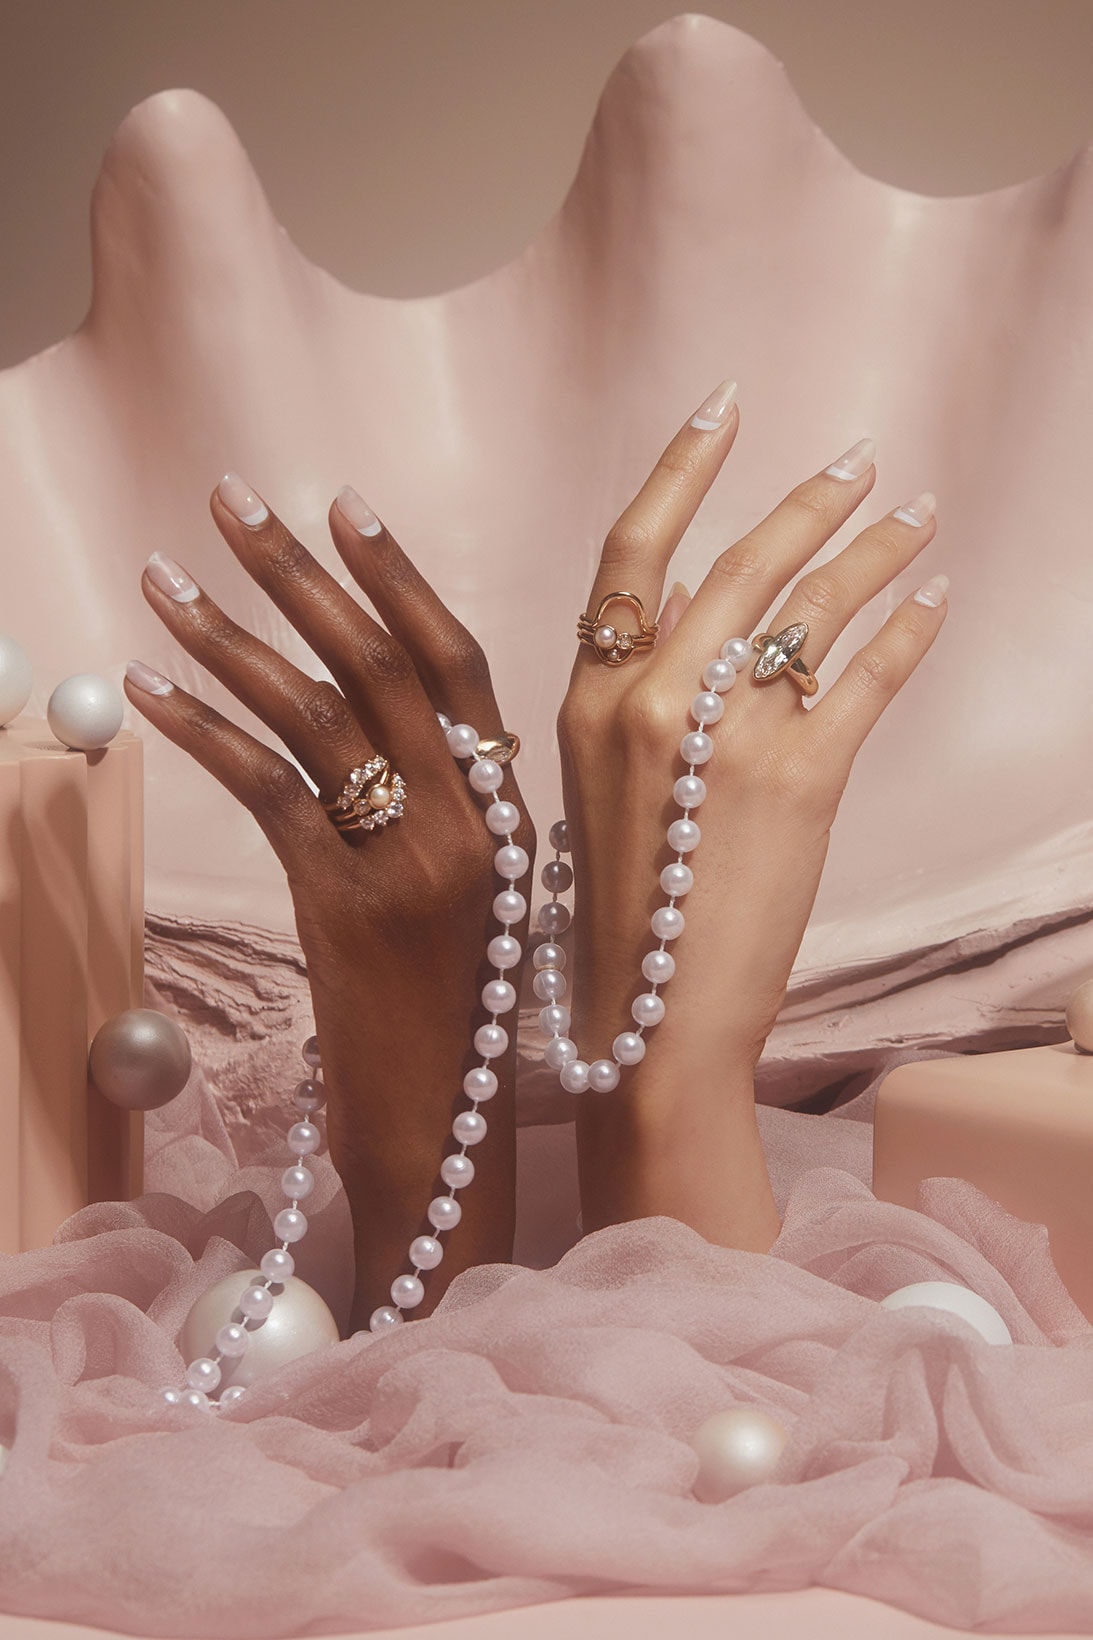 marrow fine manime wedding bridal nailcare rings jewelry collaboration manicure